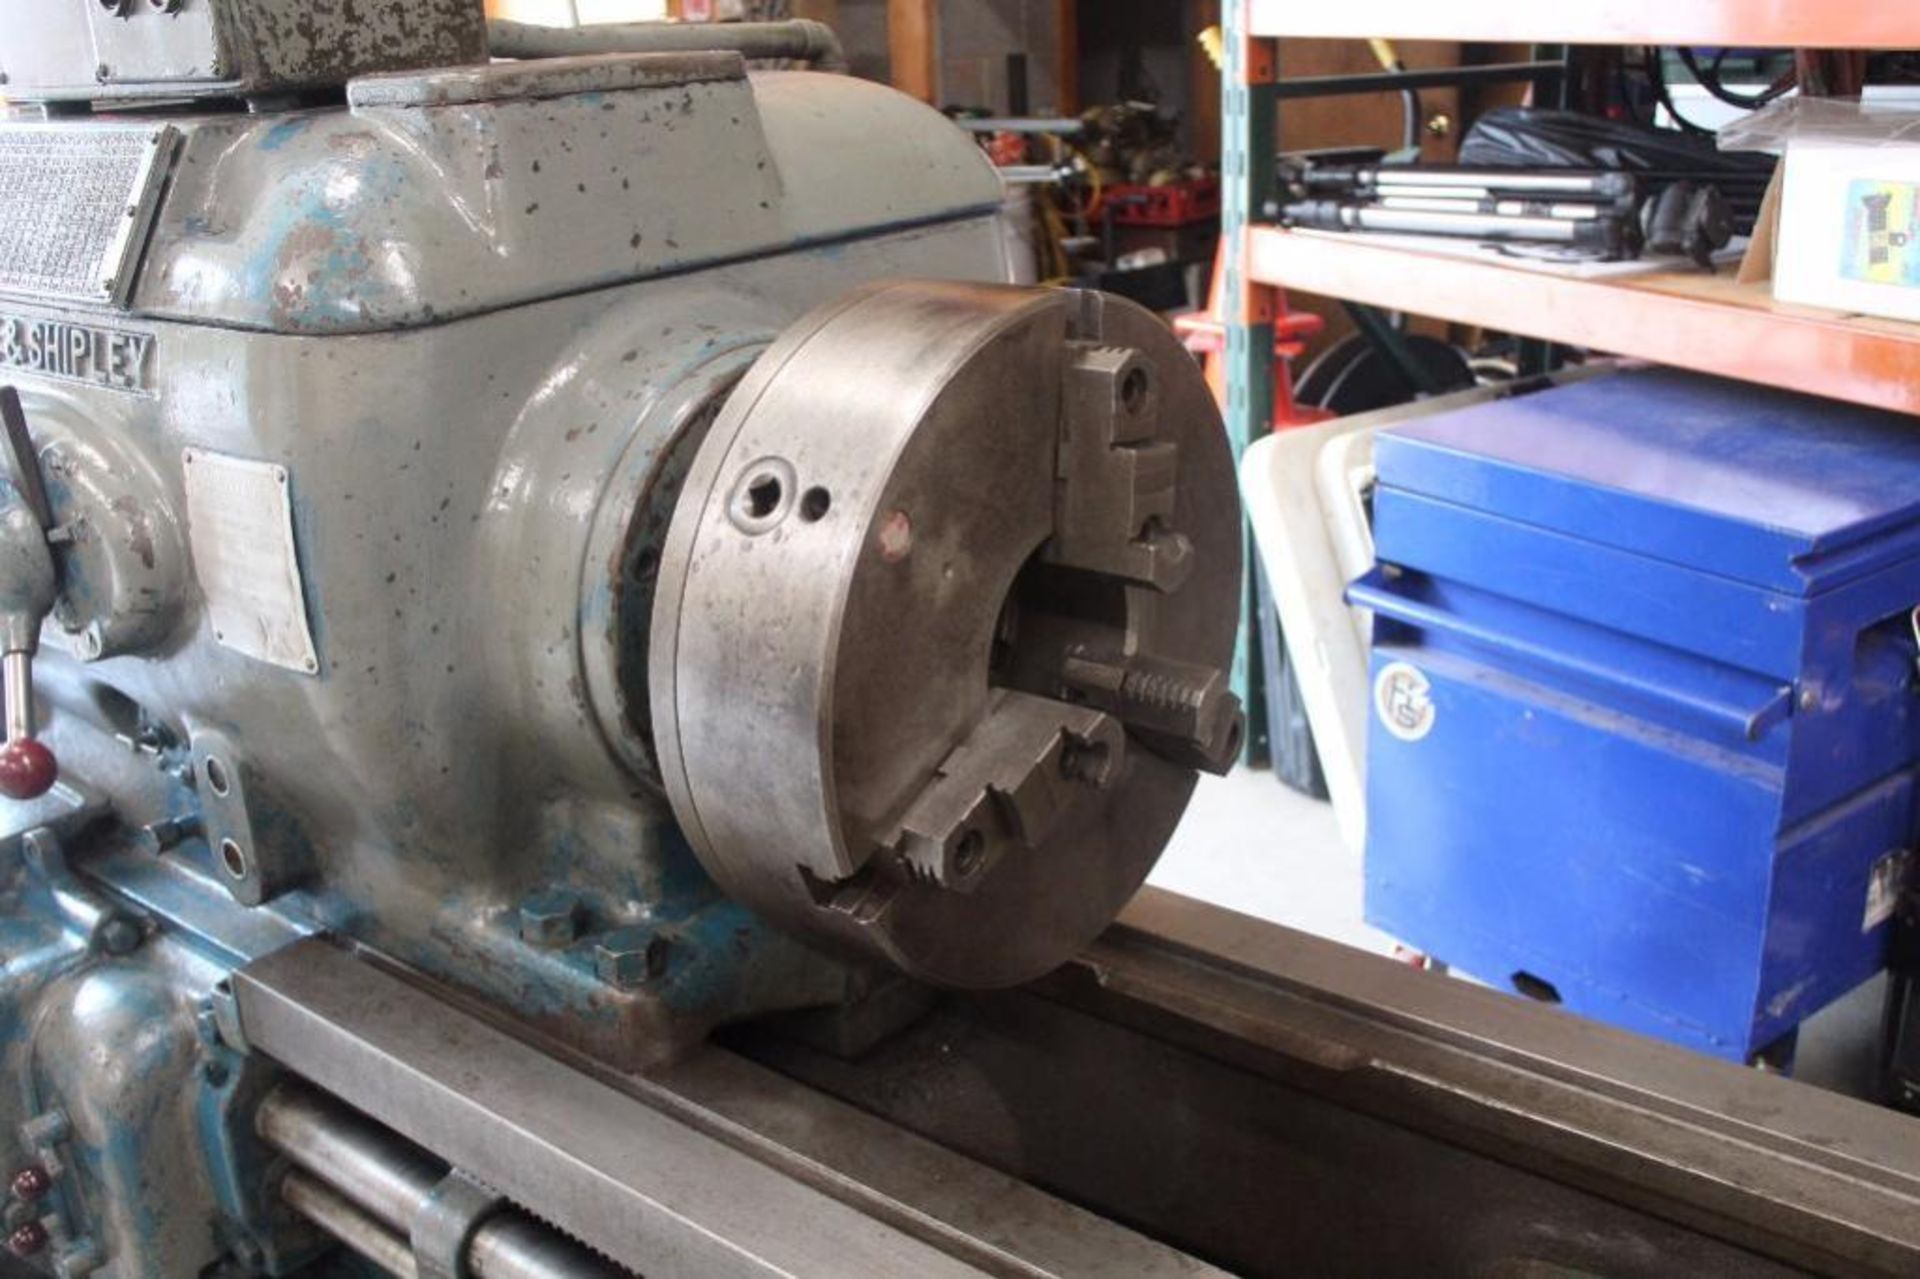 Lodge & Shipley 18"x 12' engine lathe. Quick change tool post, steady rest 3 and 4 jaw Chuck. 15 HP, - Image 14 of 25